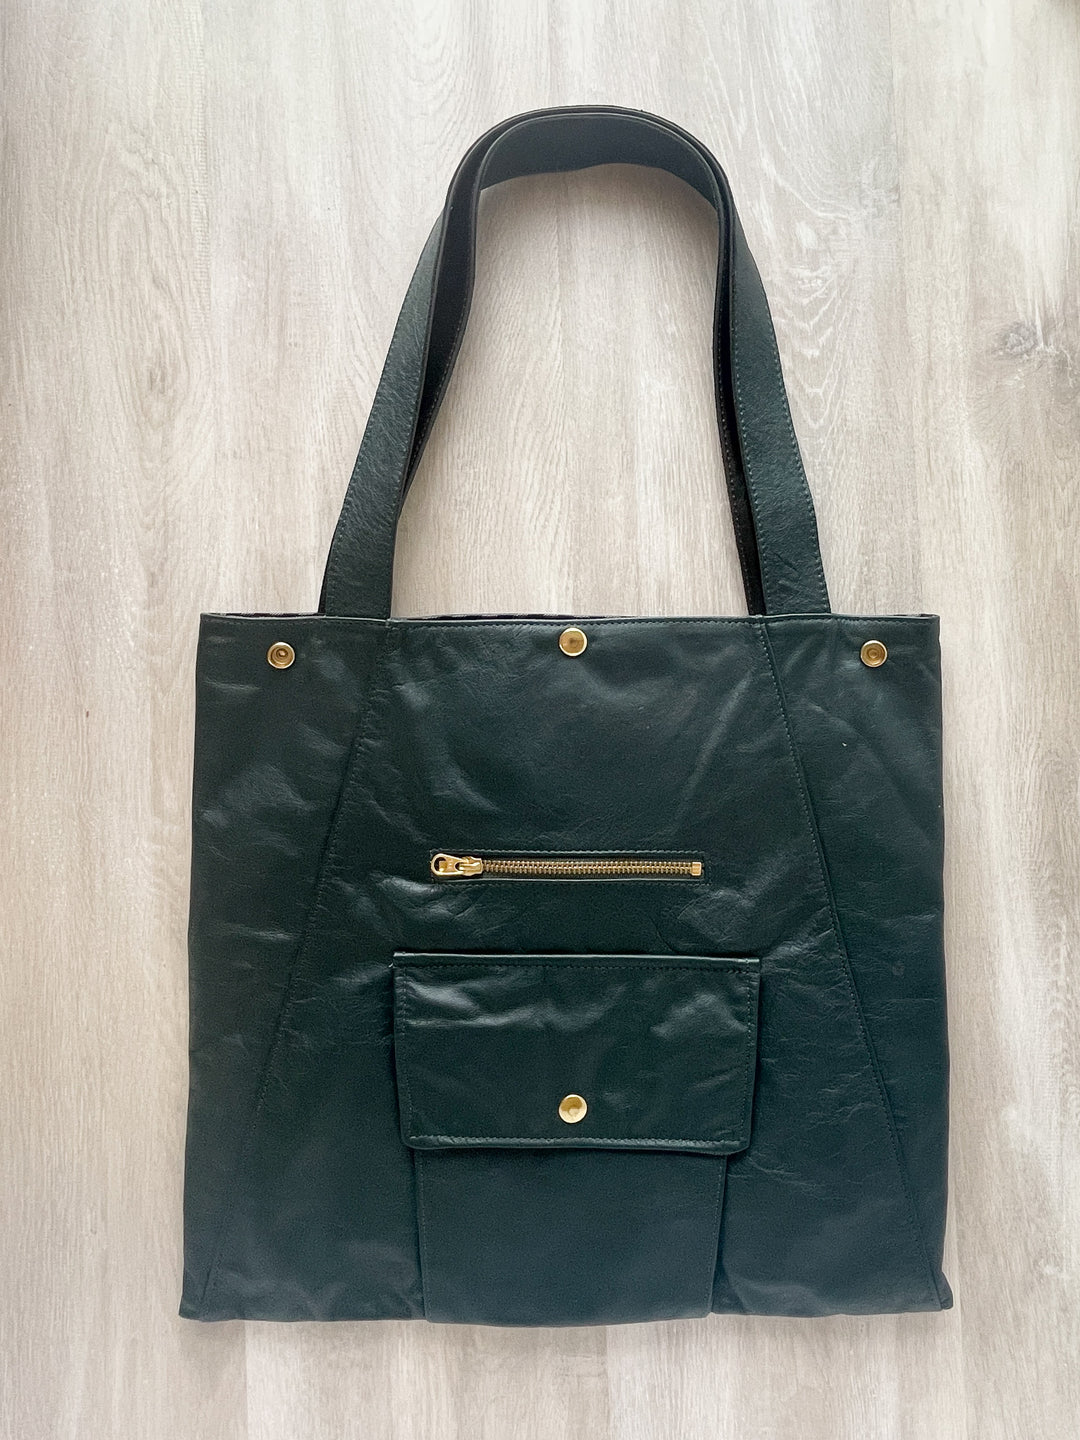 Metier Tote - One of a Kind - Hunter Green Leather